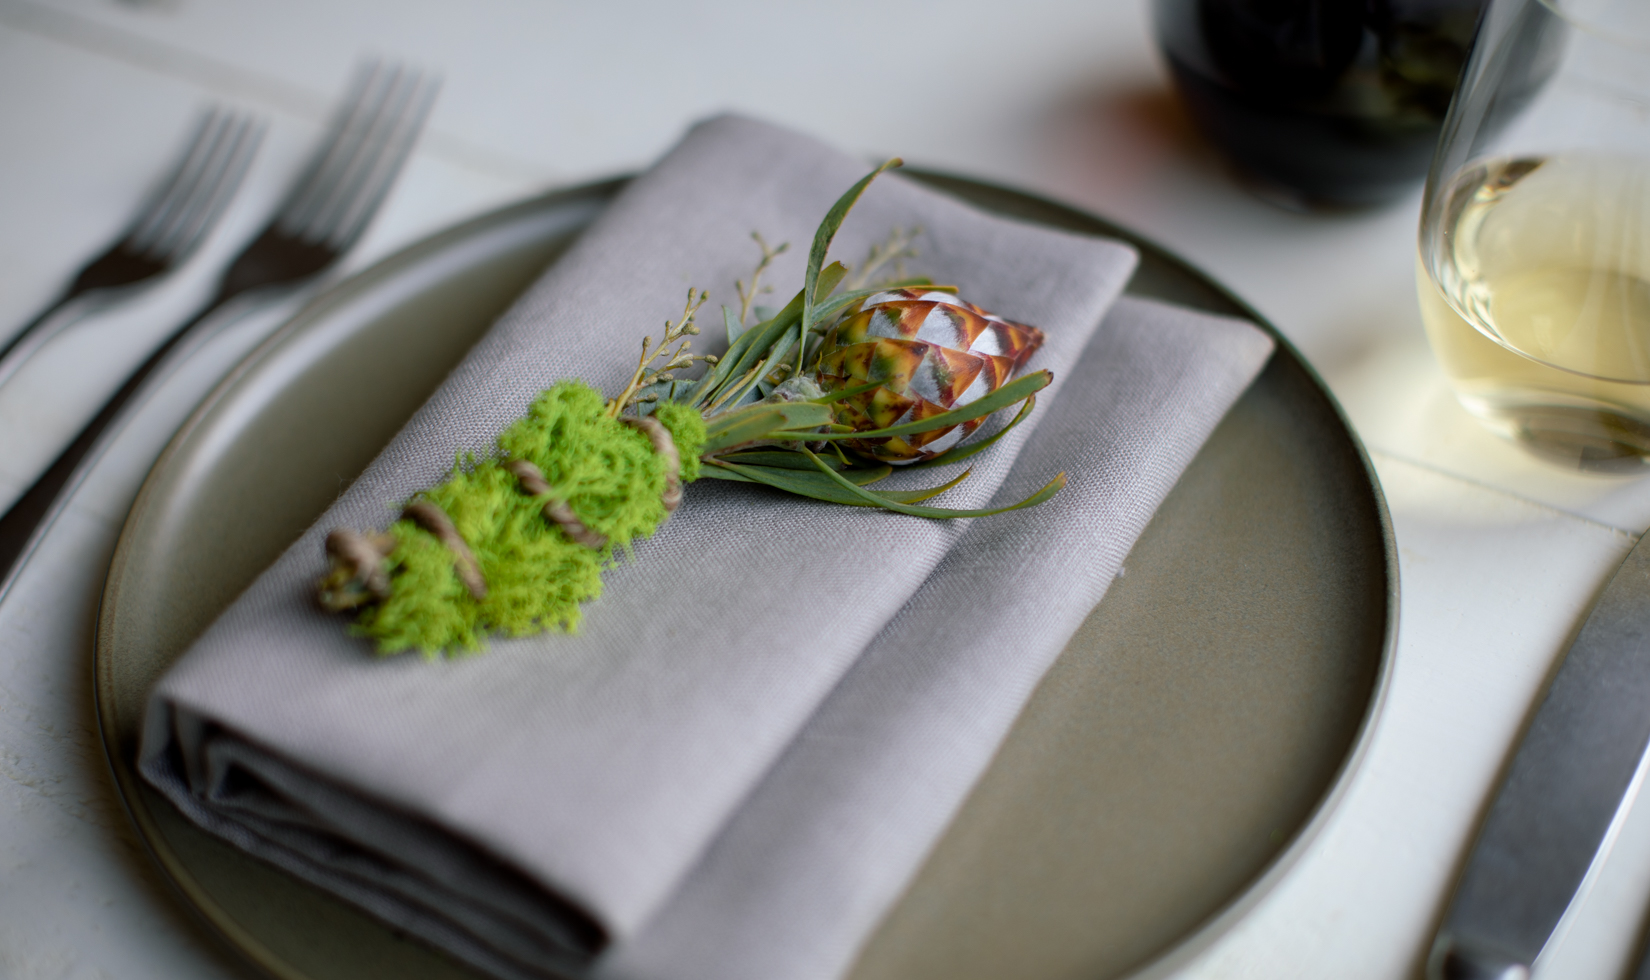 Rubeum Leucadendron and moss place setting on plate